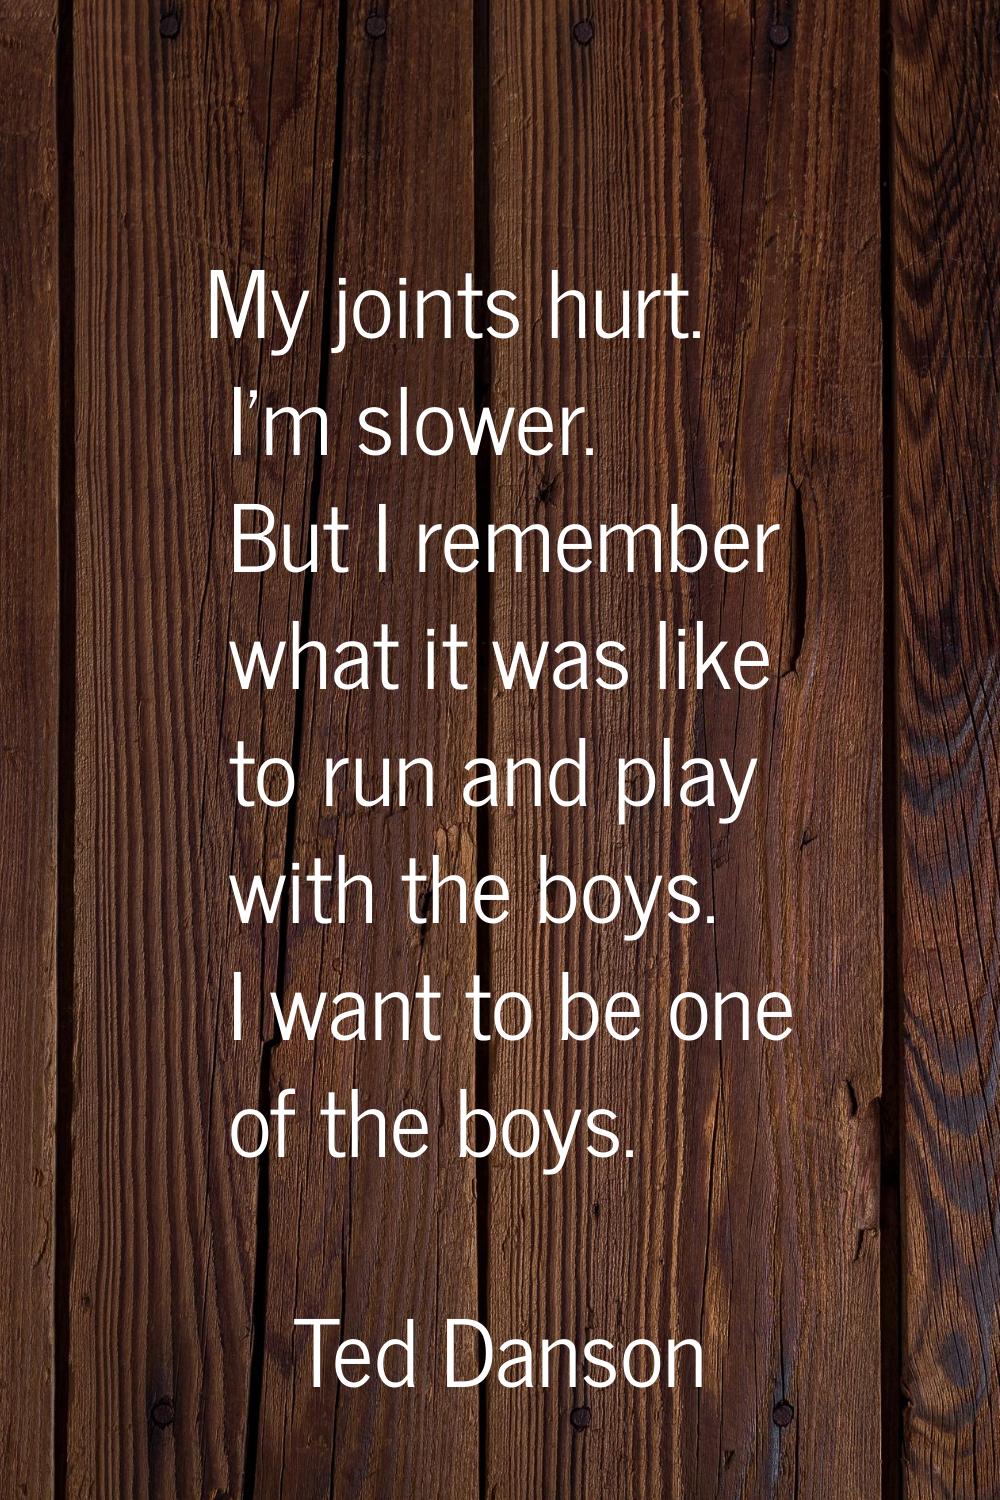 My joints hurt. I'm slower. But I remember what it was like to run and play with the boys. I want t